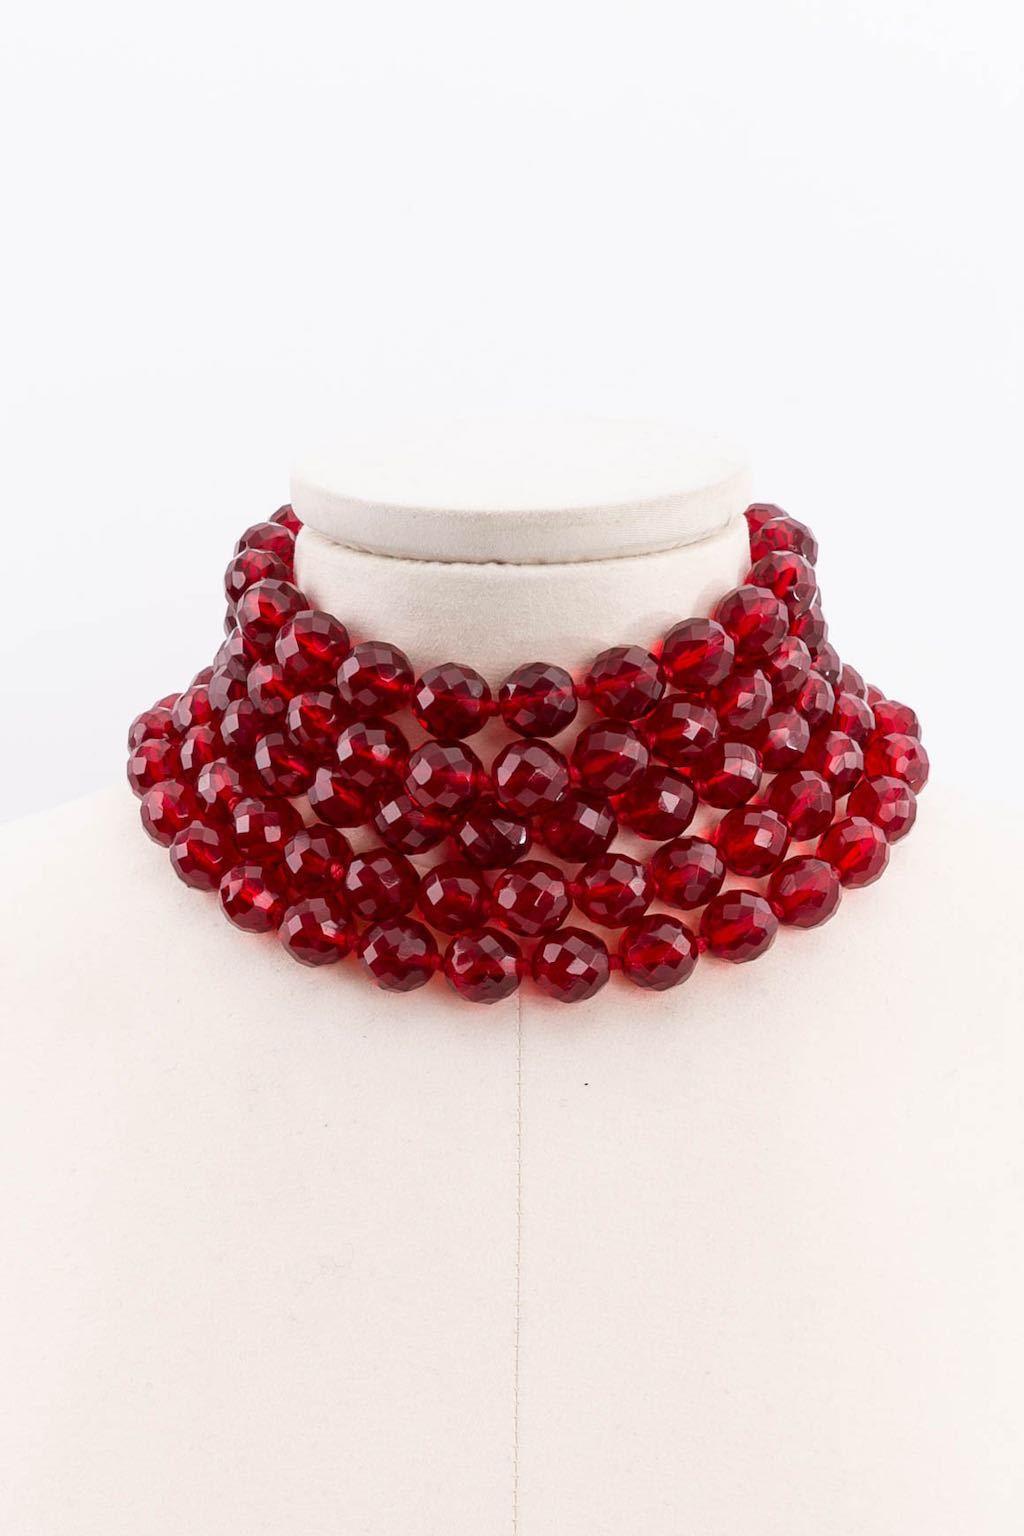 Chanel Red Beads Necklace in Gilded Metal In Excellent Condition For Sale In SAINT-OUEN-SUR-SEINE, FR